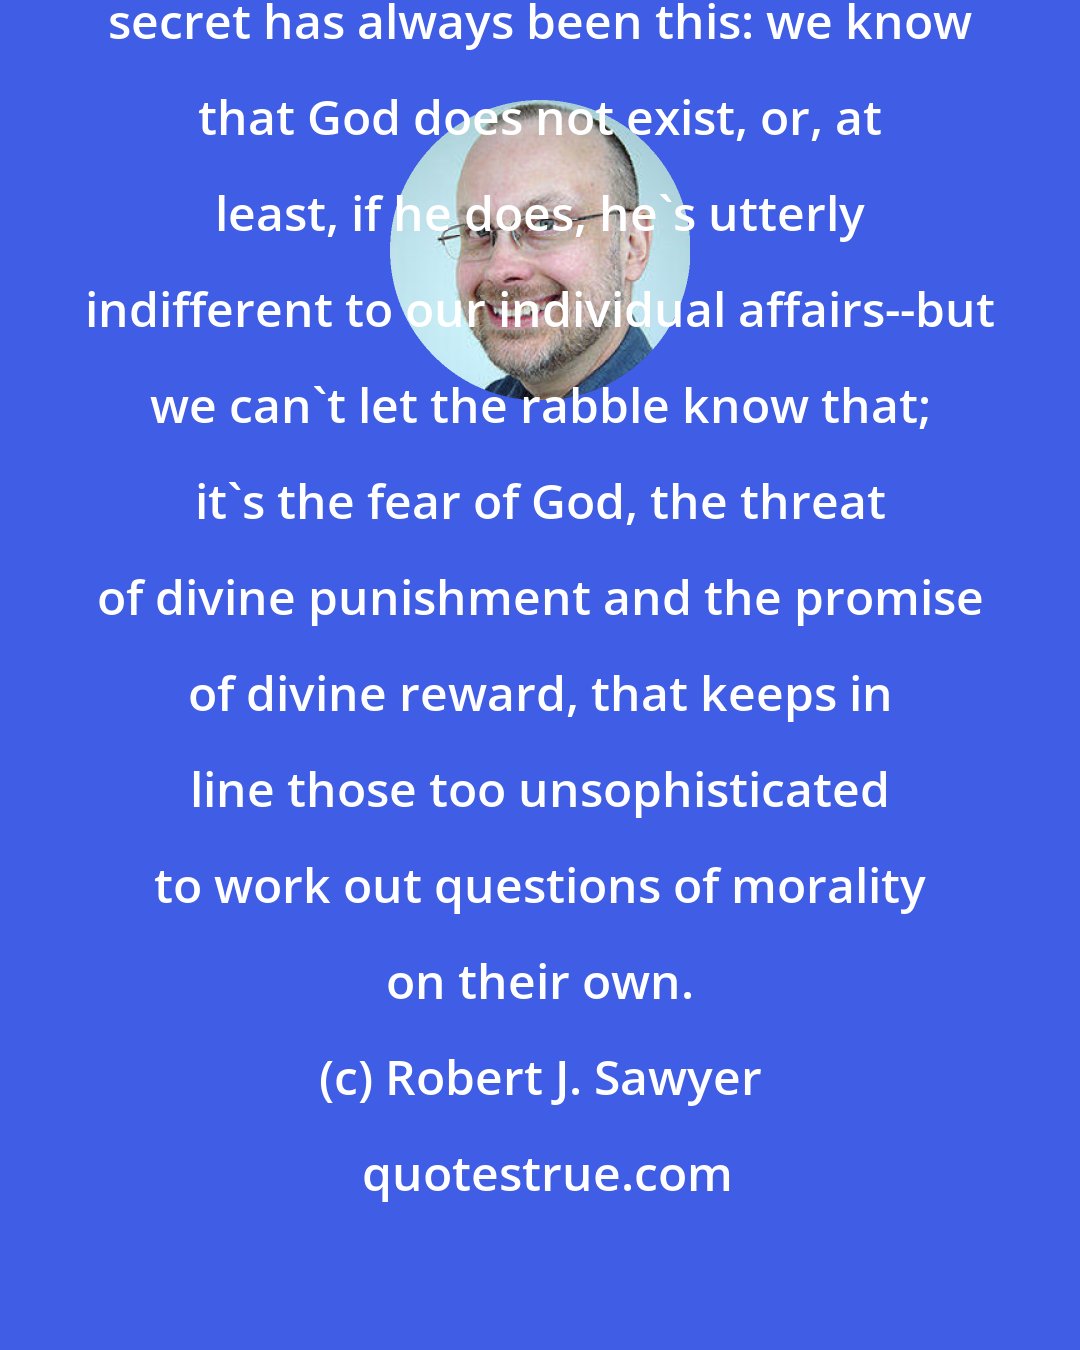 Robert J. Sawyer: Since ancient times, the philosophers' secret has always been this: we know that God does not exist, or, at least, if he does, he's utterly indifferent to our individual affairs--but we can't let the rabble know that; it's the fear of God, the threat of divine punishment and the promise of divine reward, that keeps in line those too unsophisticated to work out questions of morality on their own.